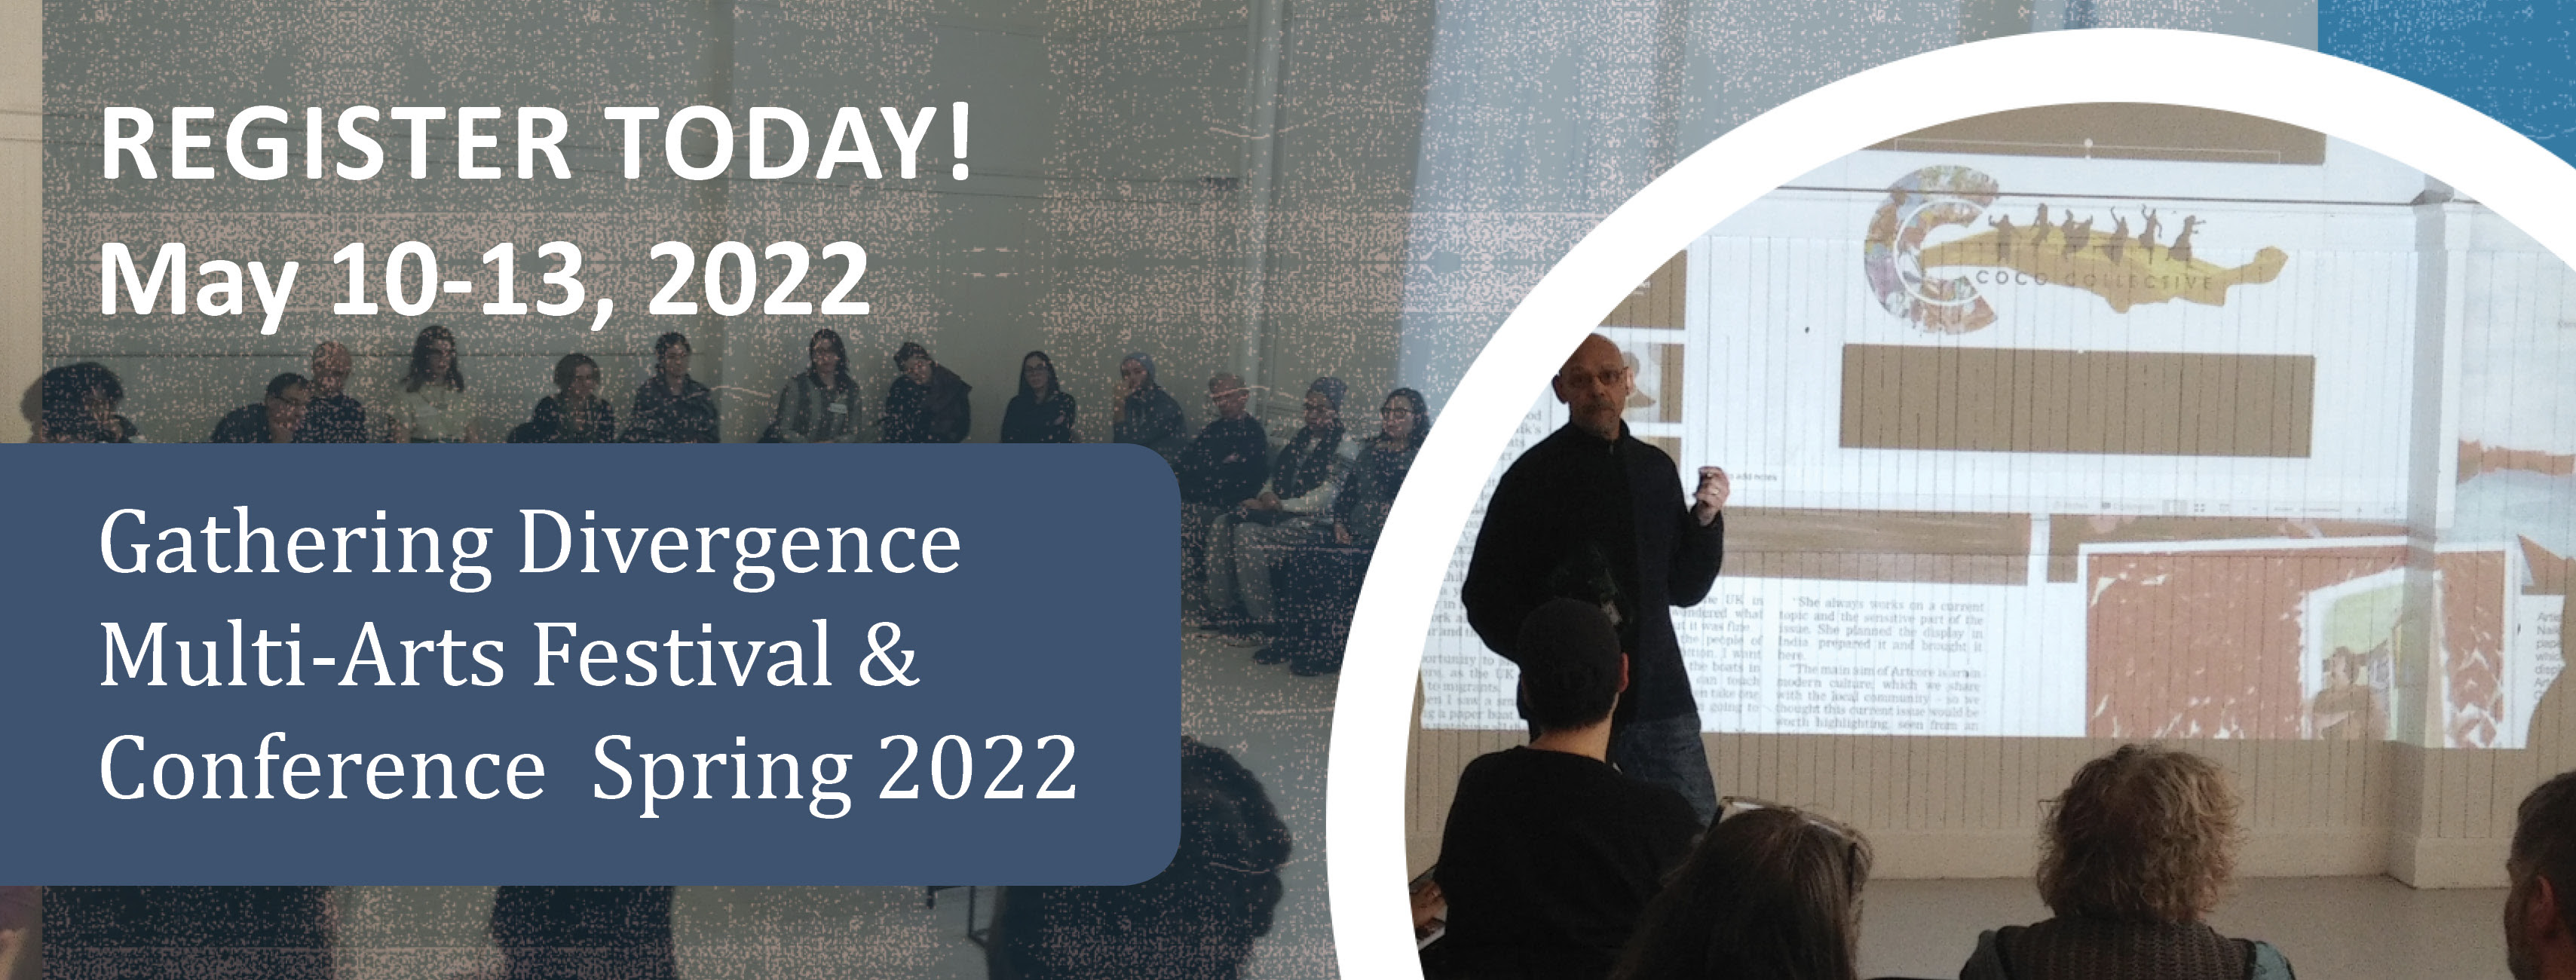 Registration is open! May 10-13, 2022. Gathering Divergence Multi-Arts Festival & Conference Spring 2022. Behind the text images of a workshop and a person speaking with images projected on the screen behind him.